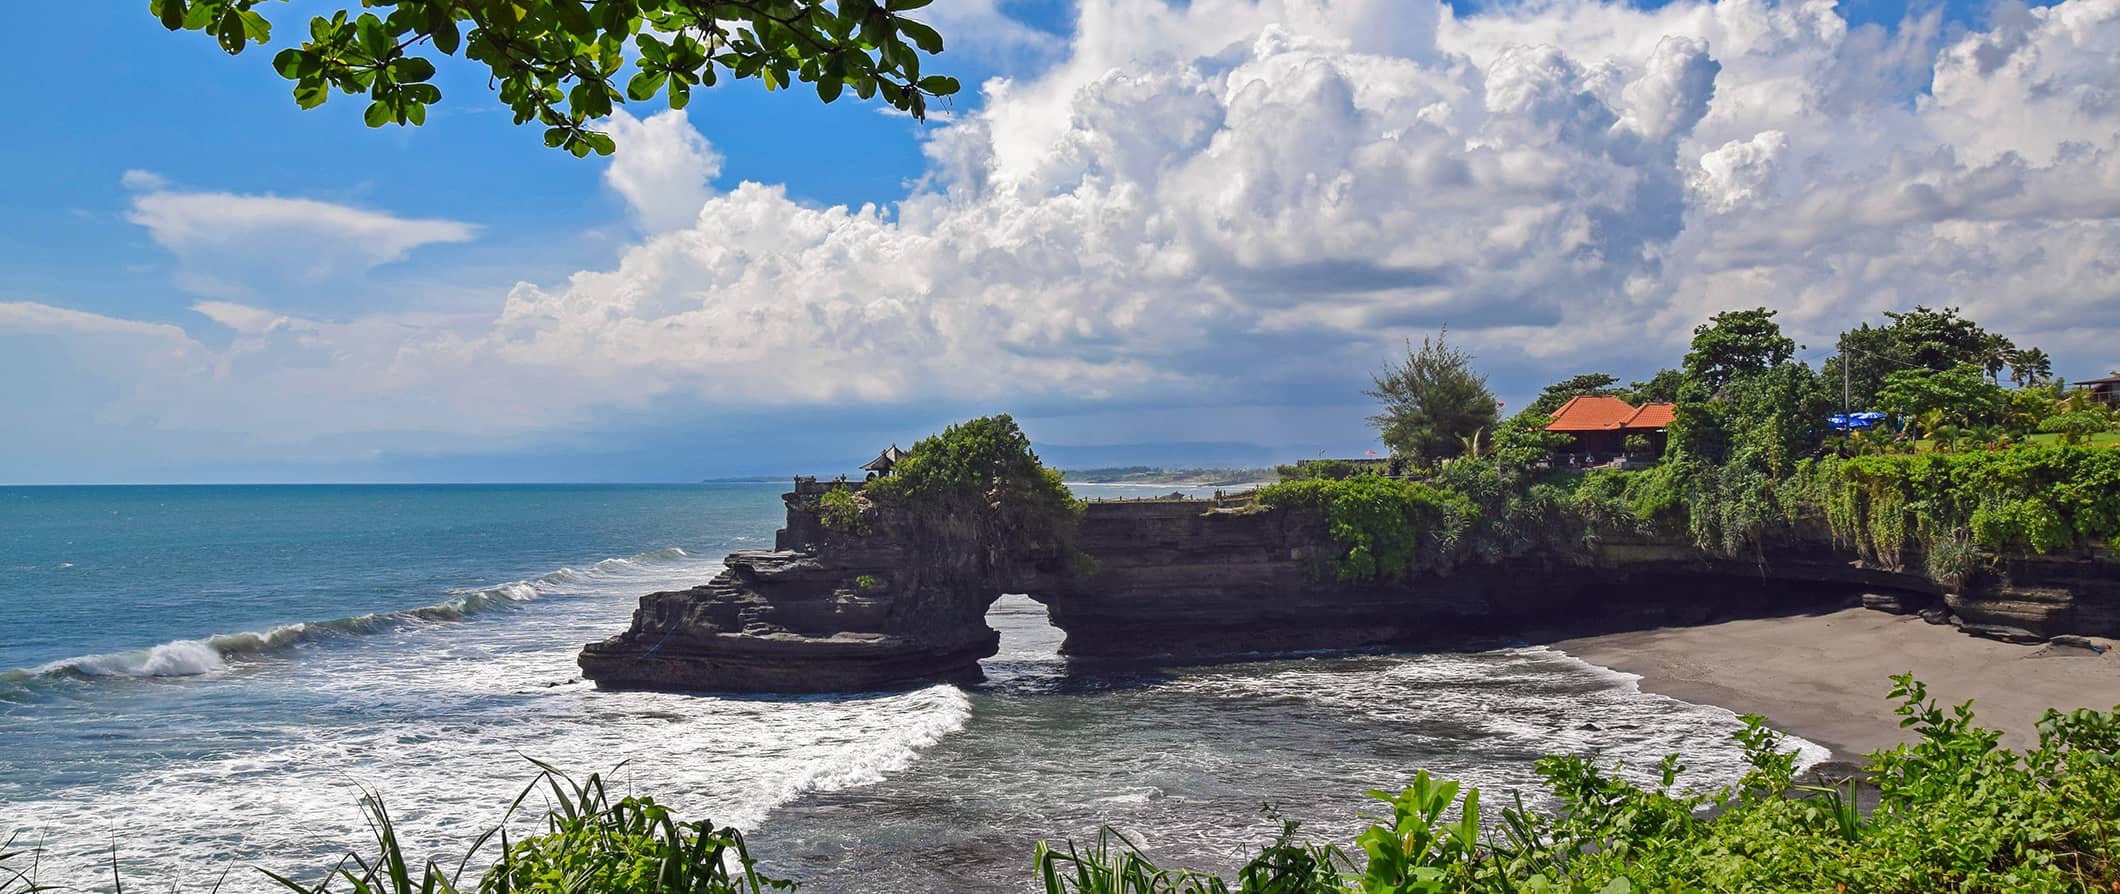 A rugged beach in Bali, Indonesia surrounded by green trees on a sunny day